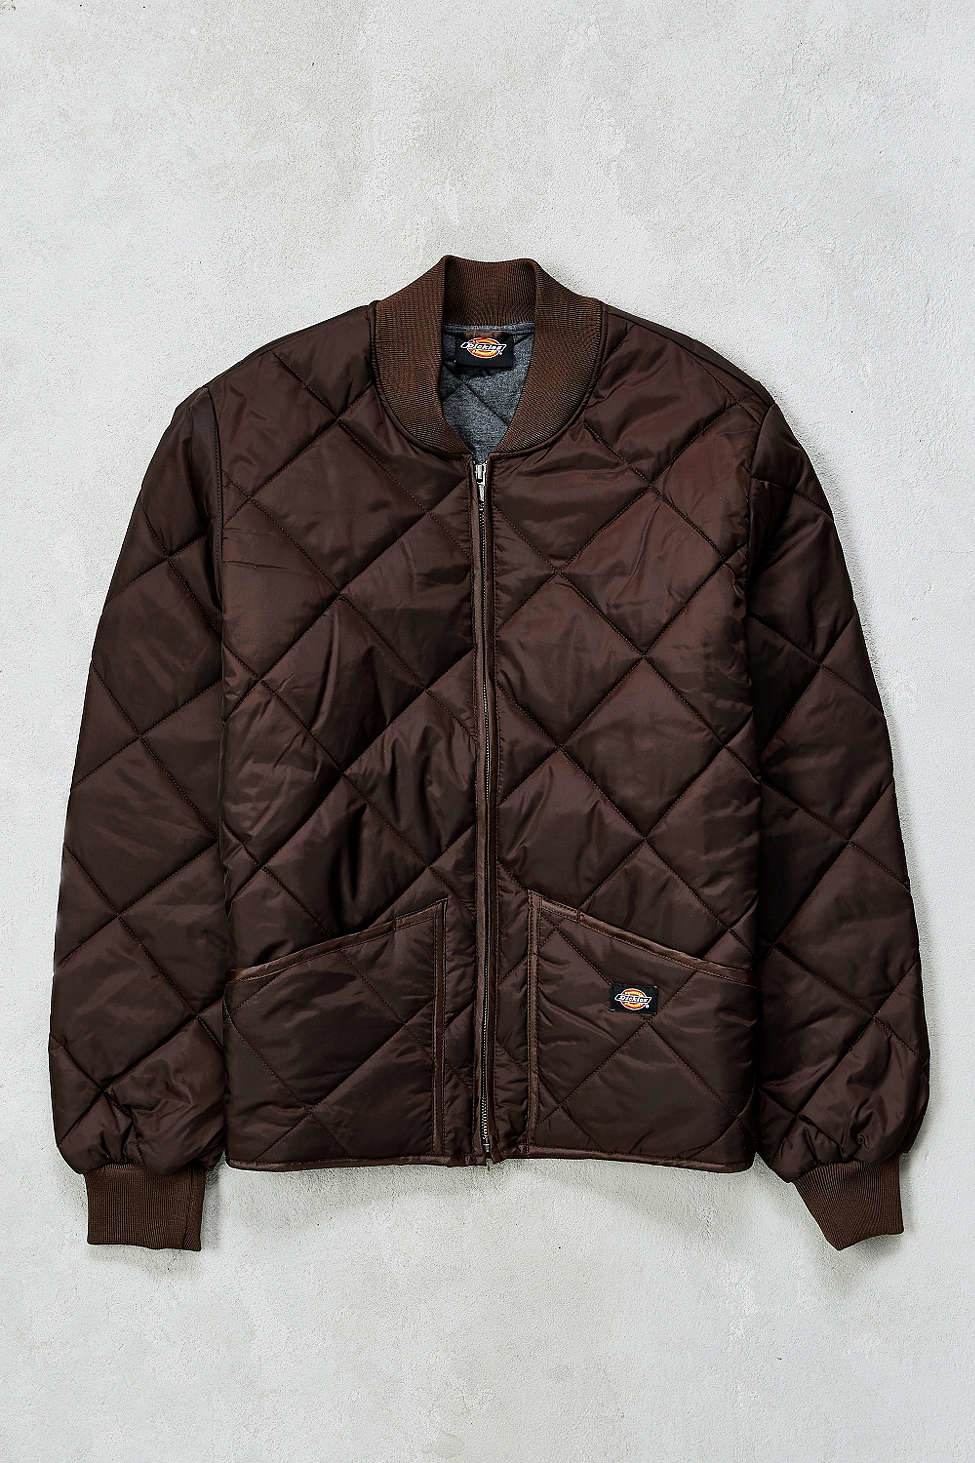 Lyst - Dickies Diamond Quilted Jacket in Brown for Men